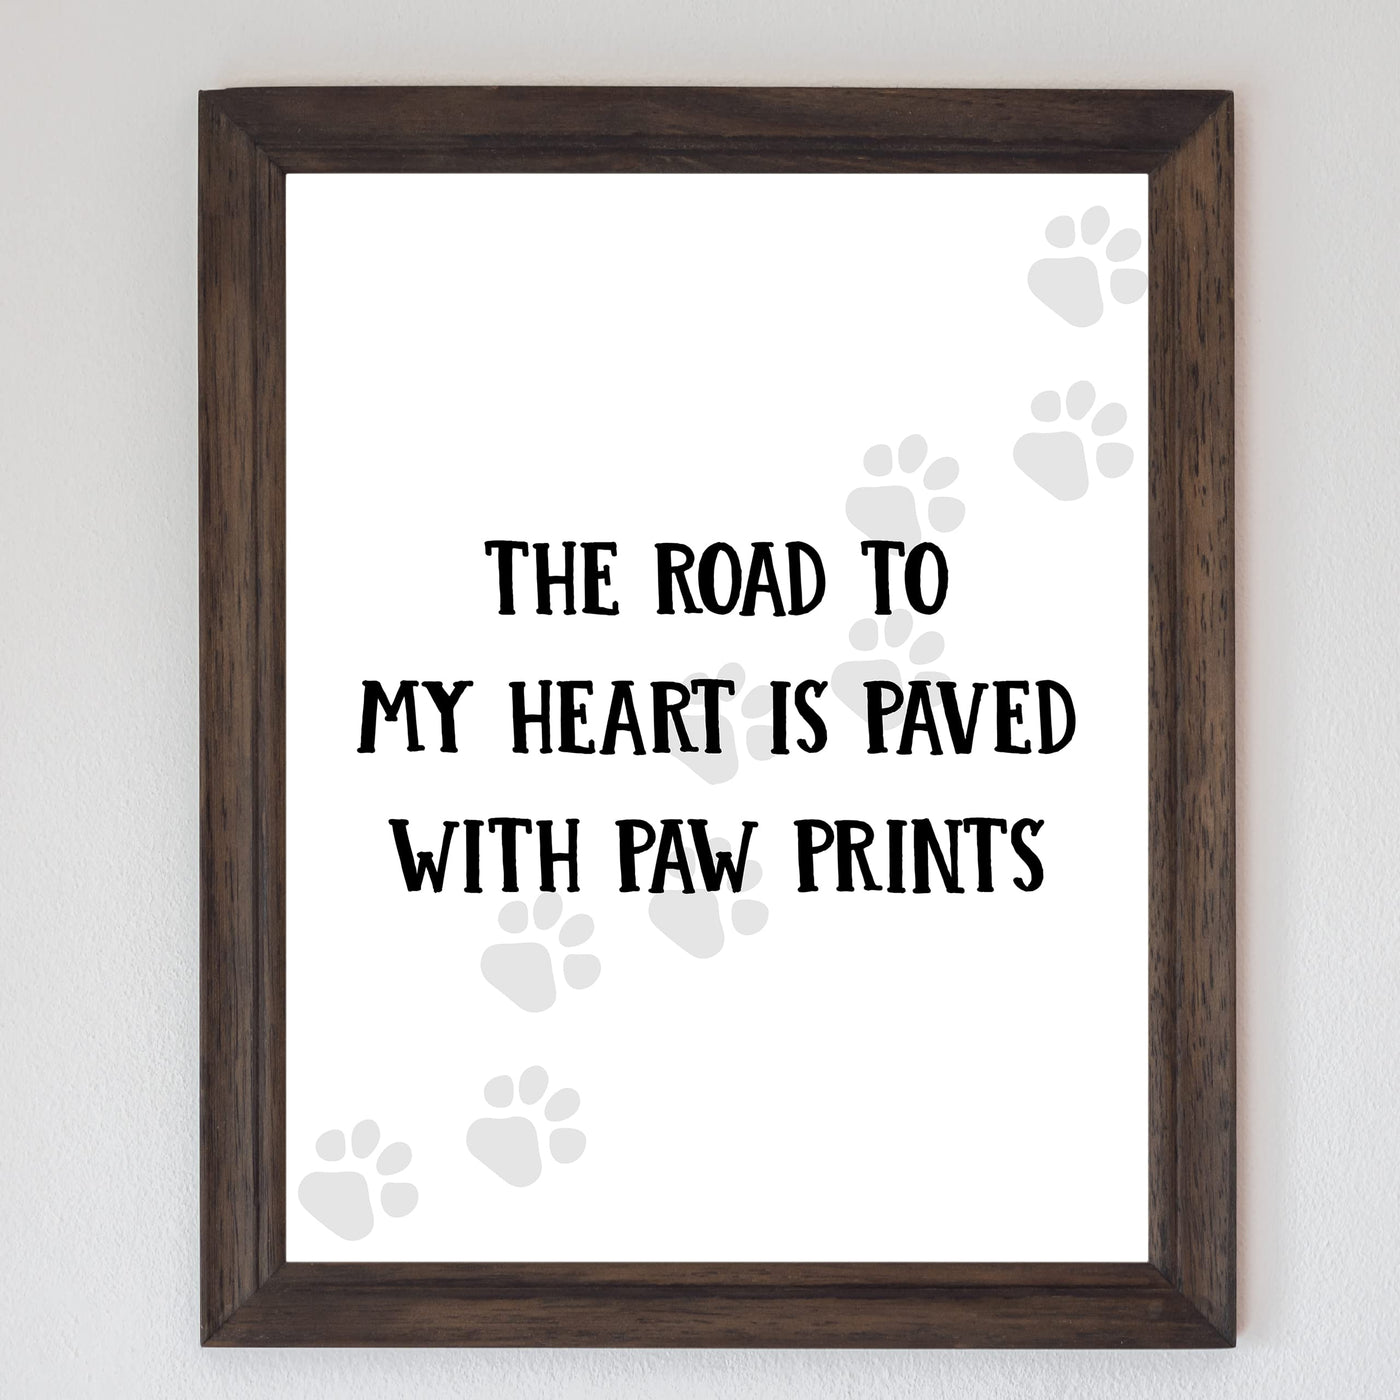 The Road to My Heart Is Paved With Paw Prints- Funny Dog & Cat Wall Art Sign- 8 x 10" Modern Wall Decor Print -Ready to Frame. Perfect Home-Office-Vet Clinic Decor. Great Gift for Pet Owners!